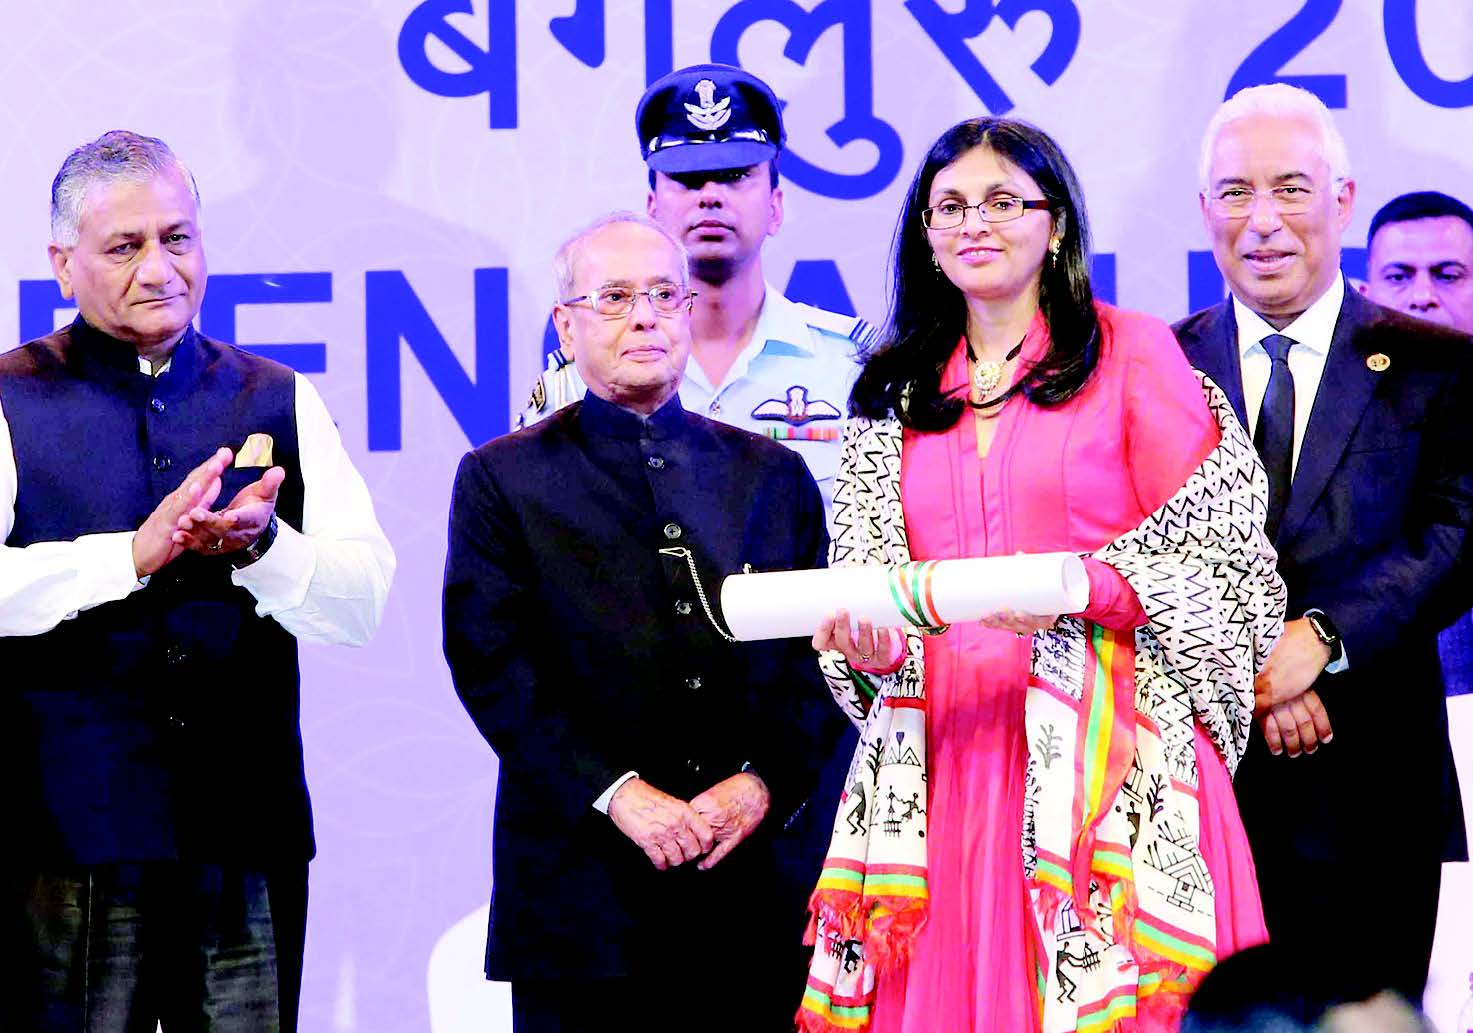 President Pranab Mukherjee conferred Pravasi Bharatiya Samman on Nisha Desai Biswal, US Assistant Secretary of State. Seen in the picture, from L to R: General VK Singh, Minister of State for External affairs, President Pranab Mukherjee, Nisha Desai Biswal with her honor scroll and Luiss Da Costa, Prime Minister of Portugal who was also conferred the honor. Photo/Jay Mandal on assignment